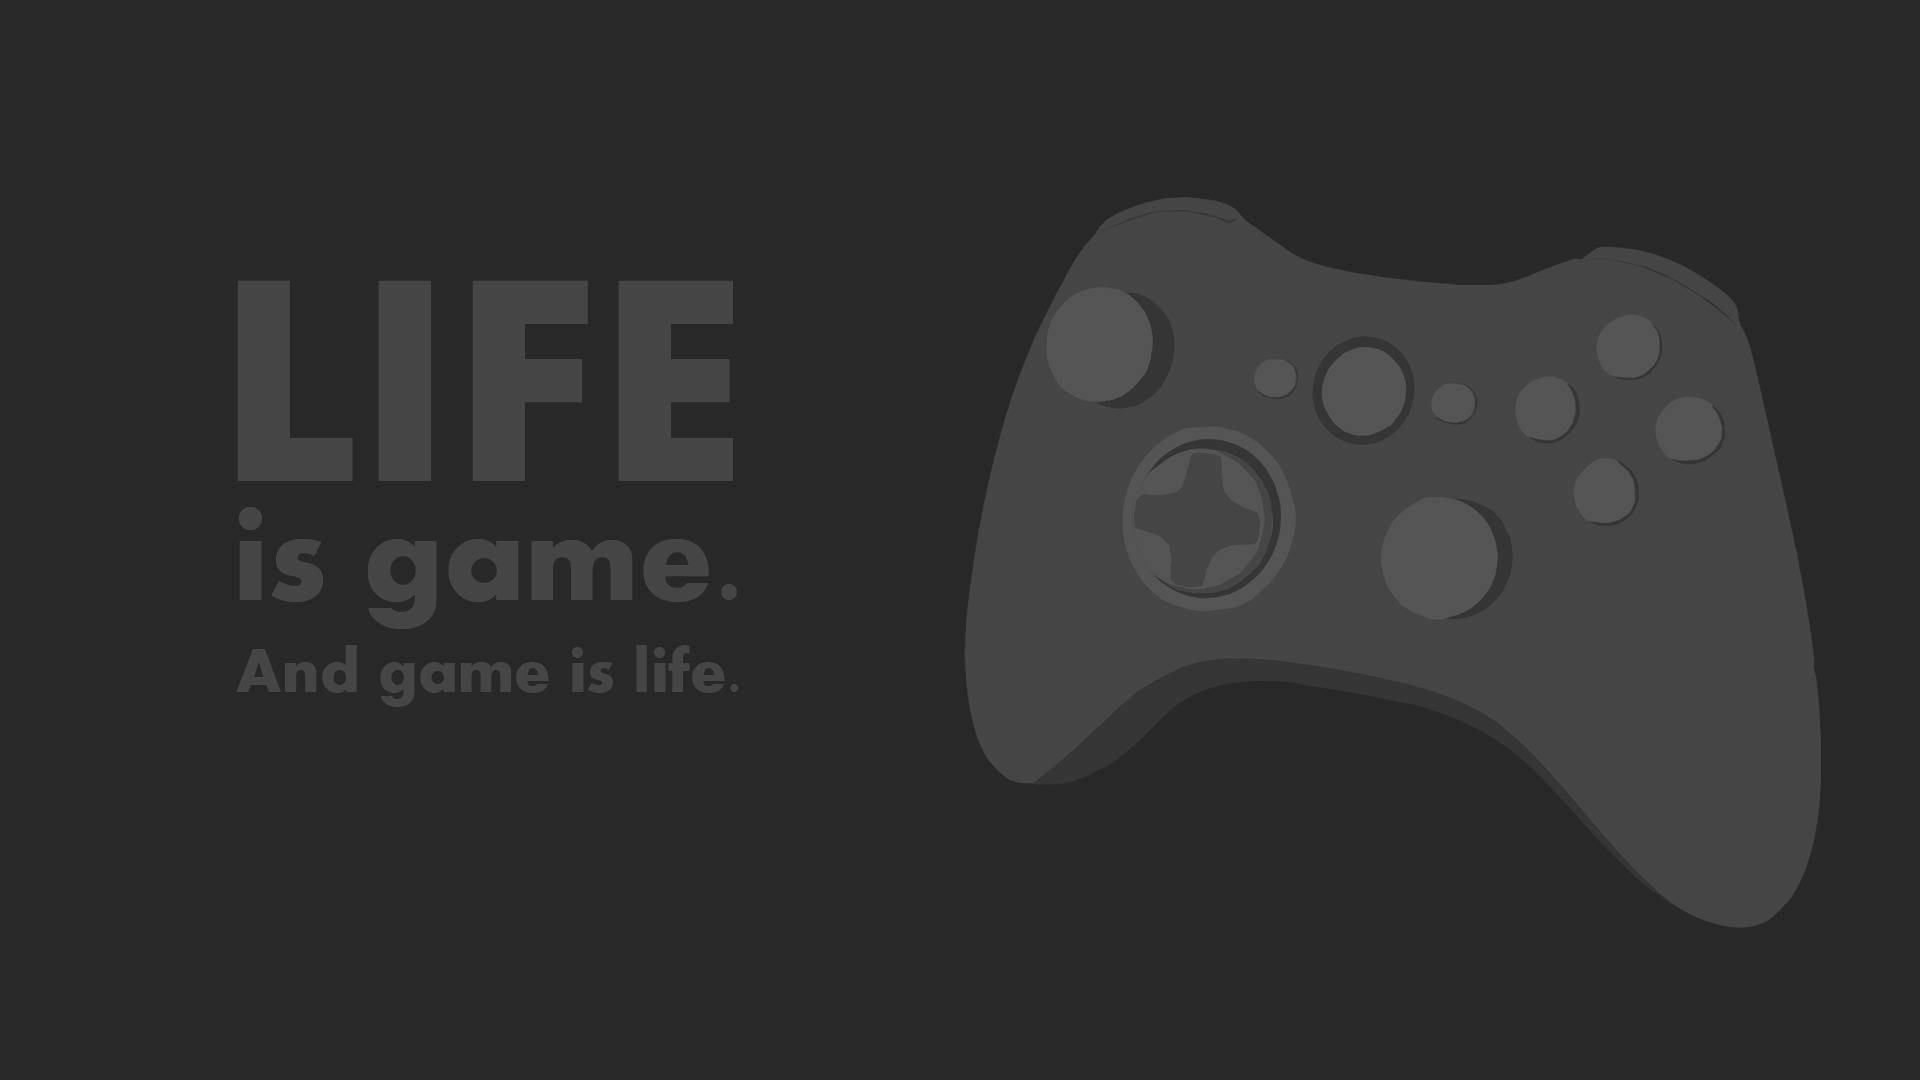 life is game wallpaper background, wallpapers